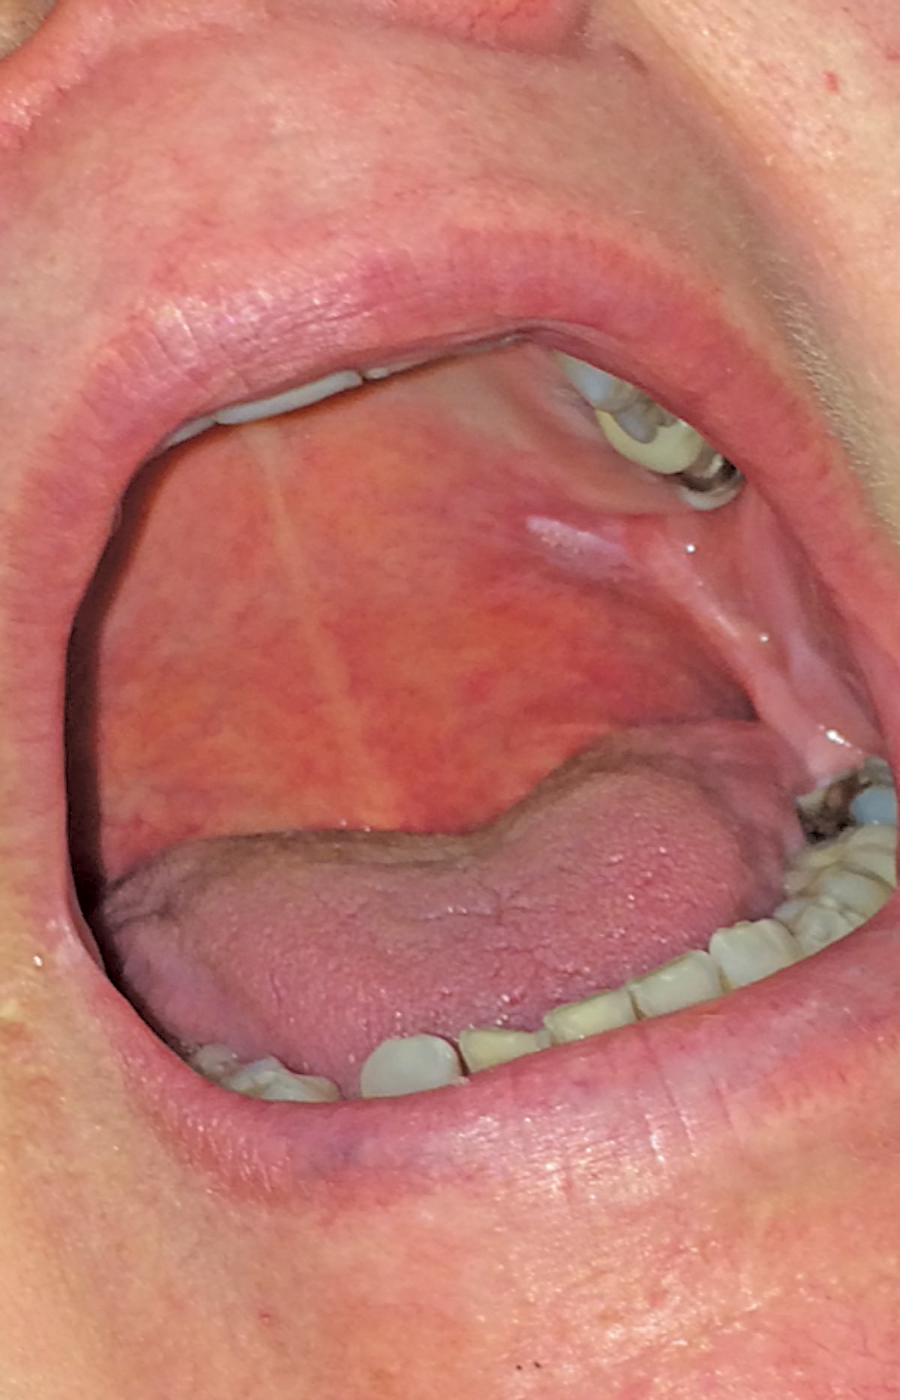 Oral Palate 84